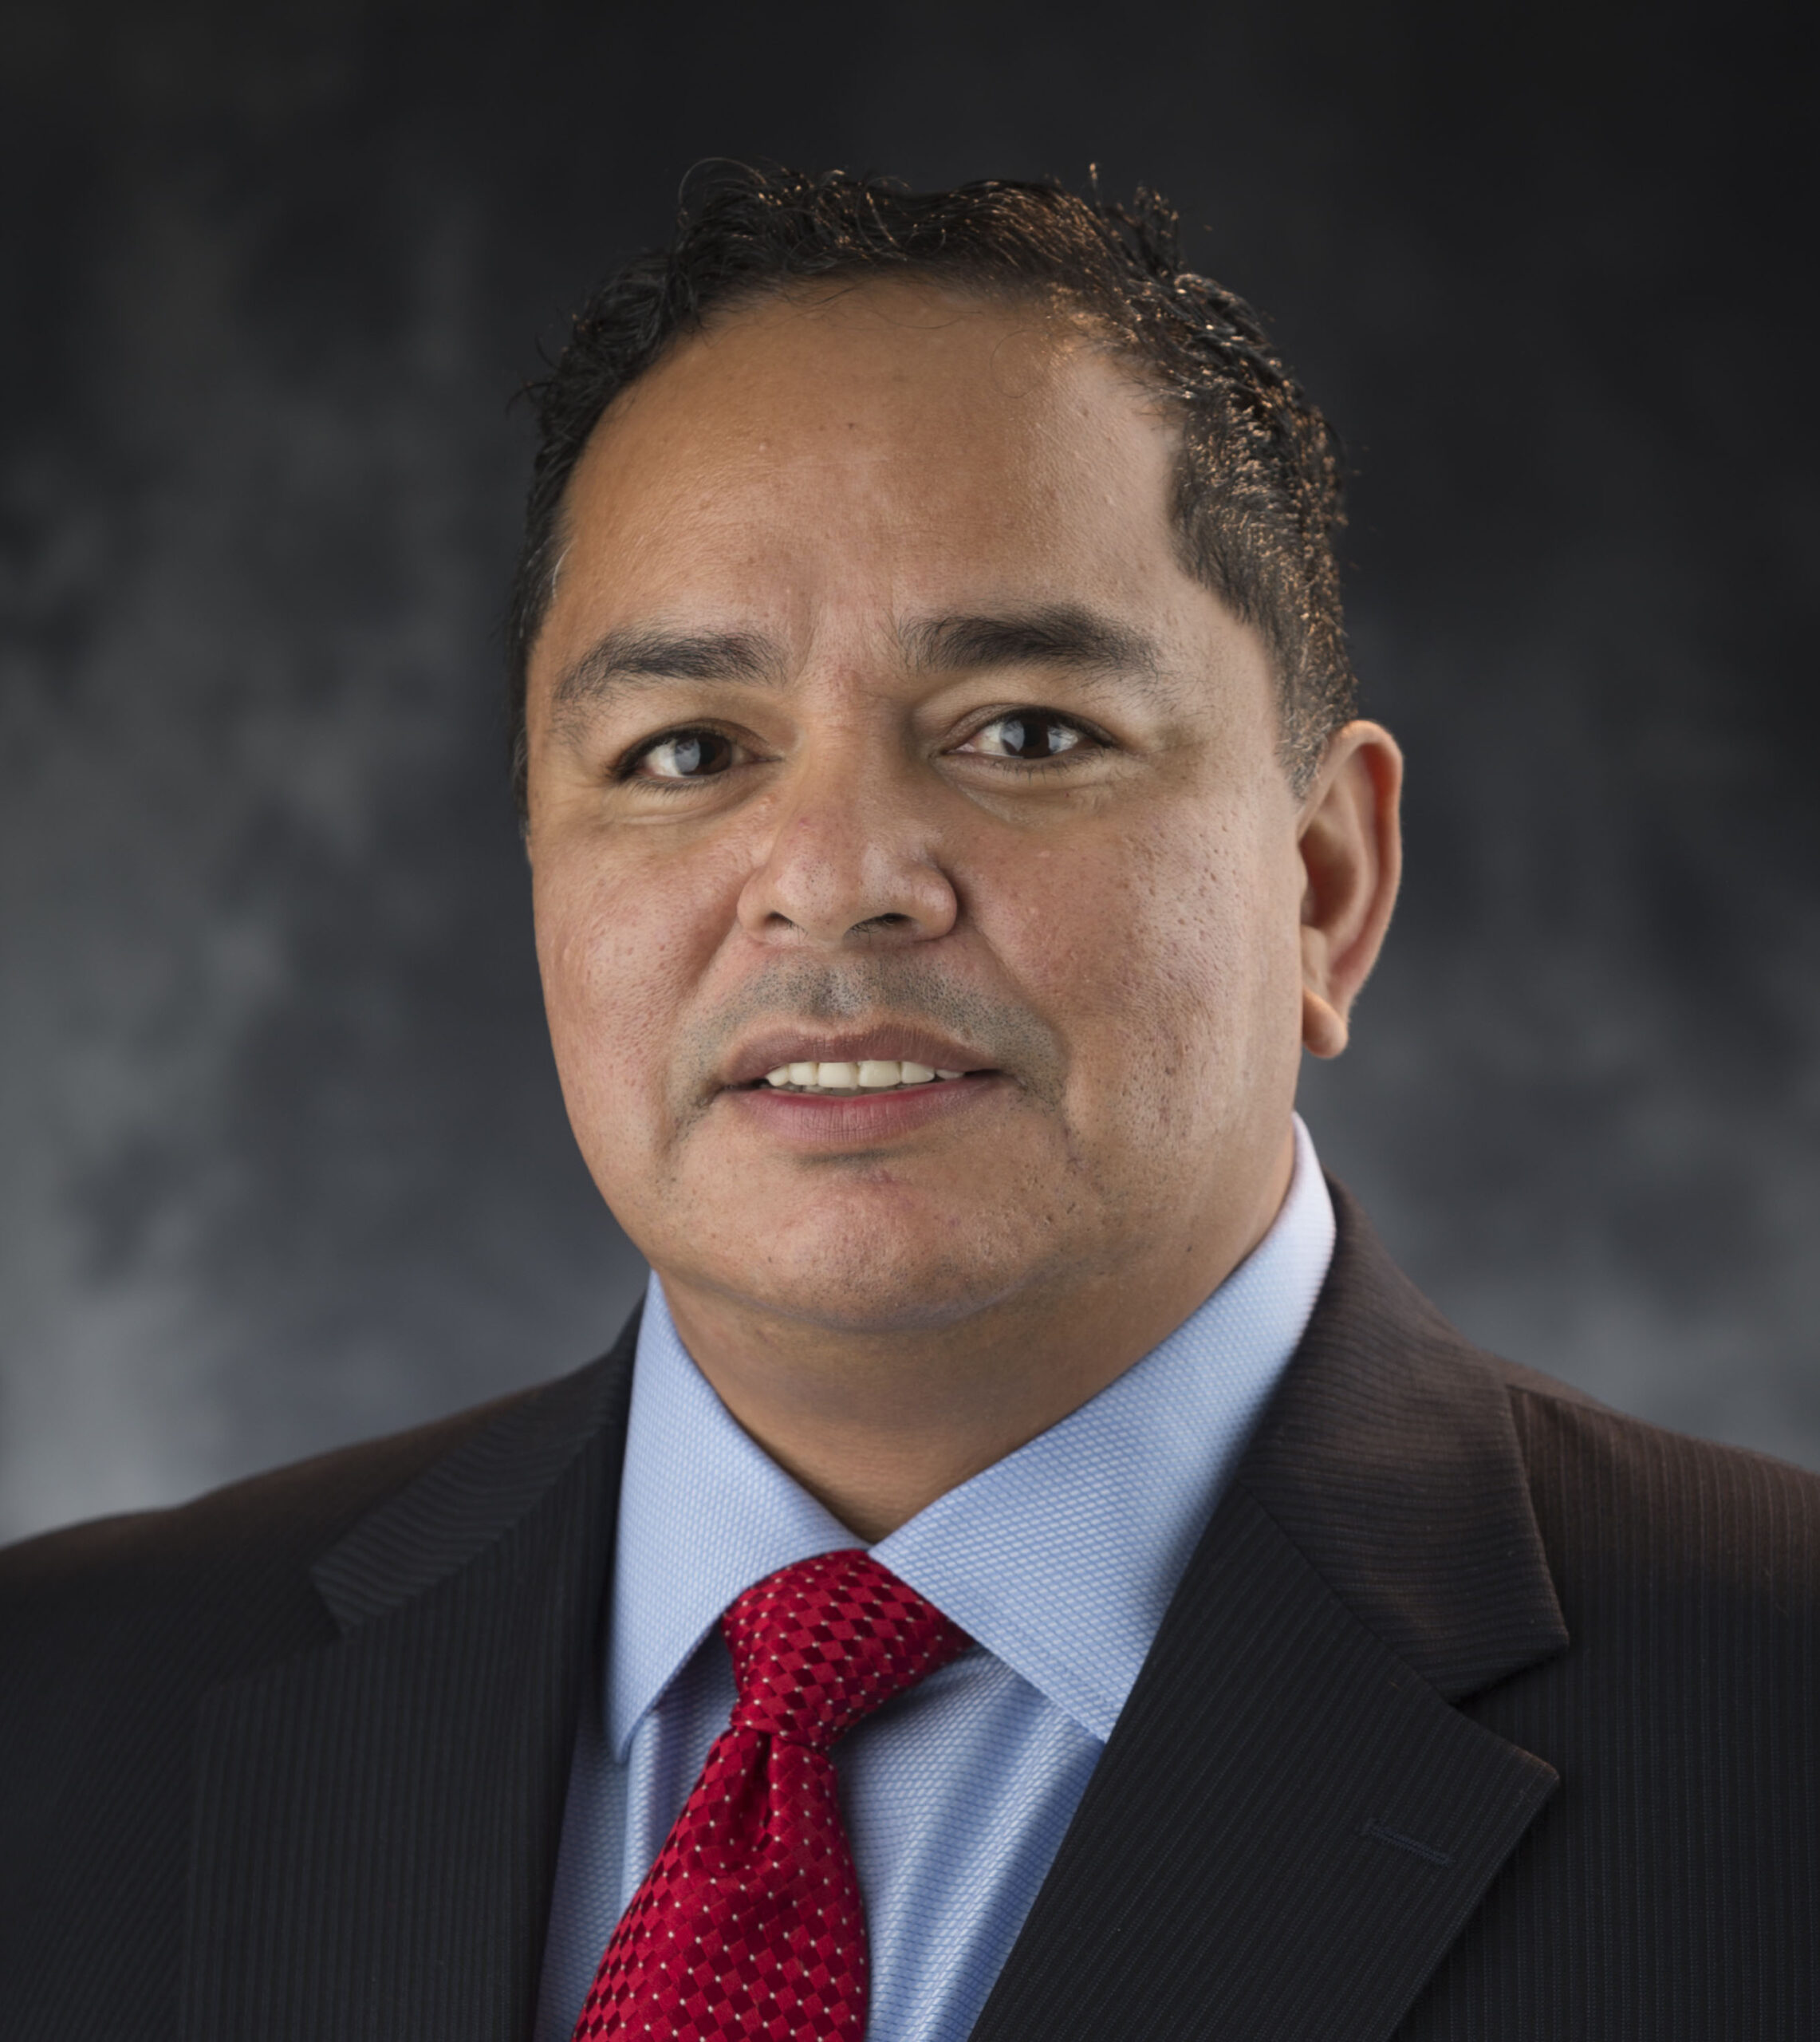 Rob Rodriguez, CCIM, MBA of Verde Commercial Real Estate Group LLC is a member of XPX San Antonio